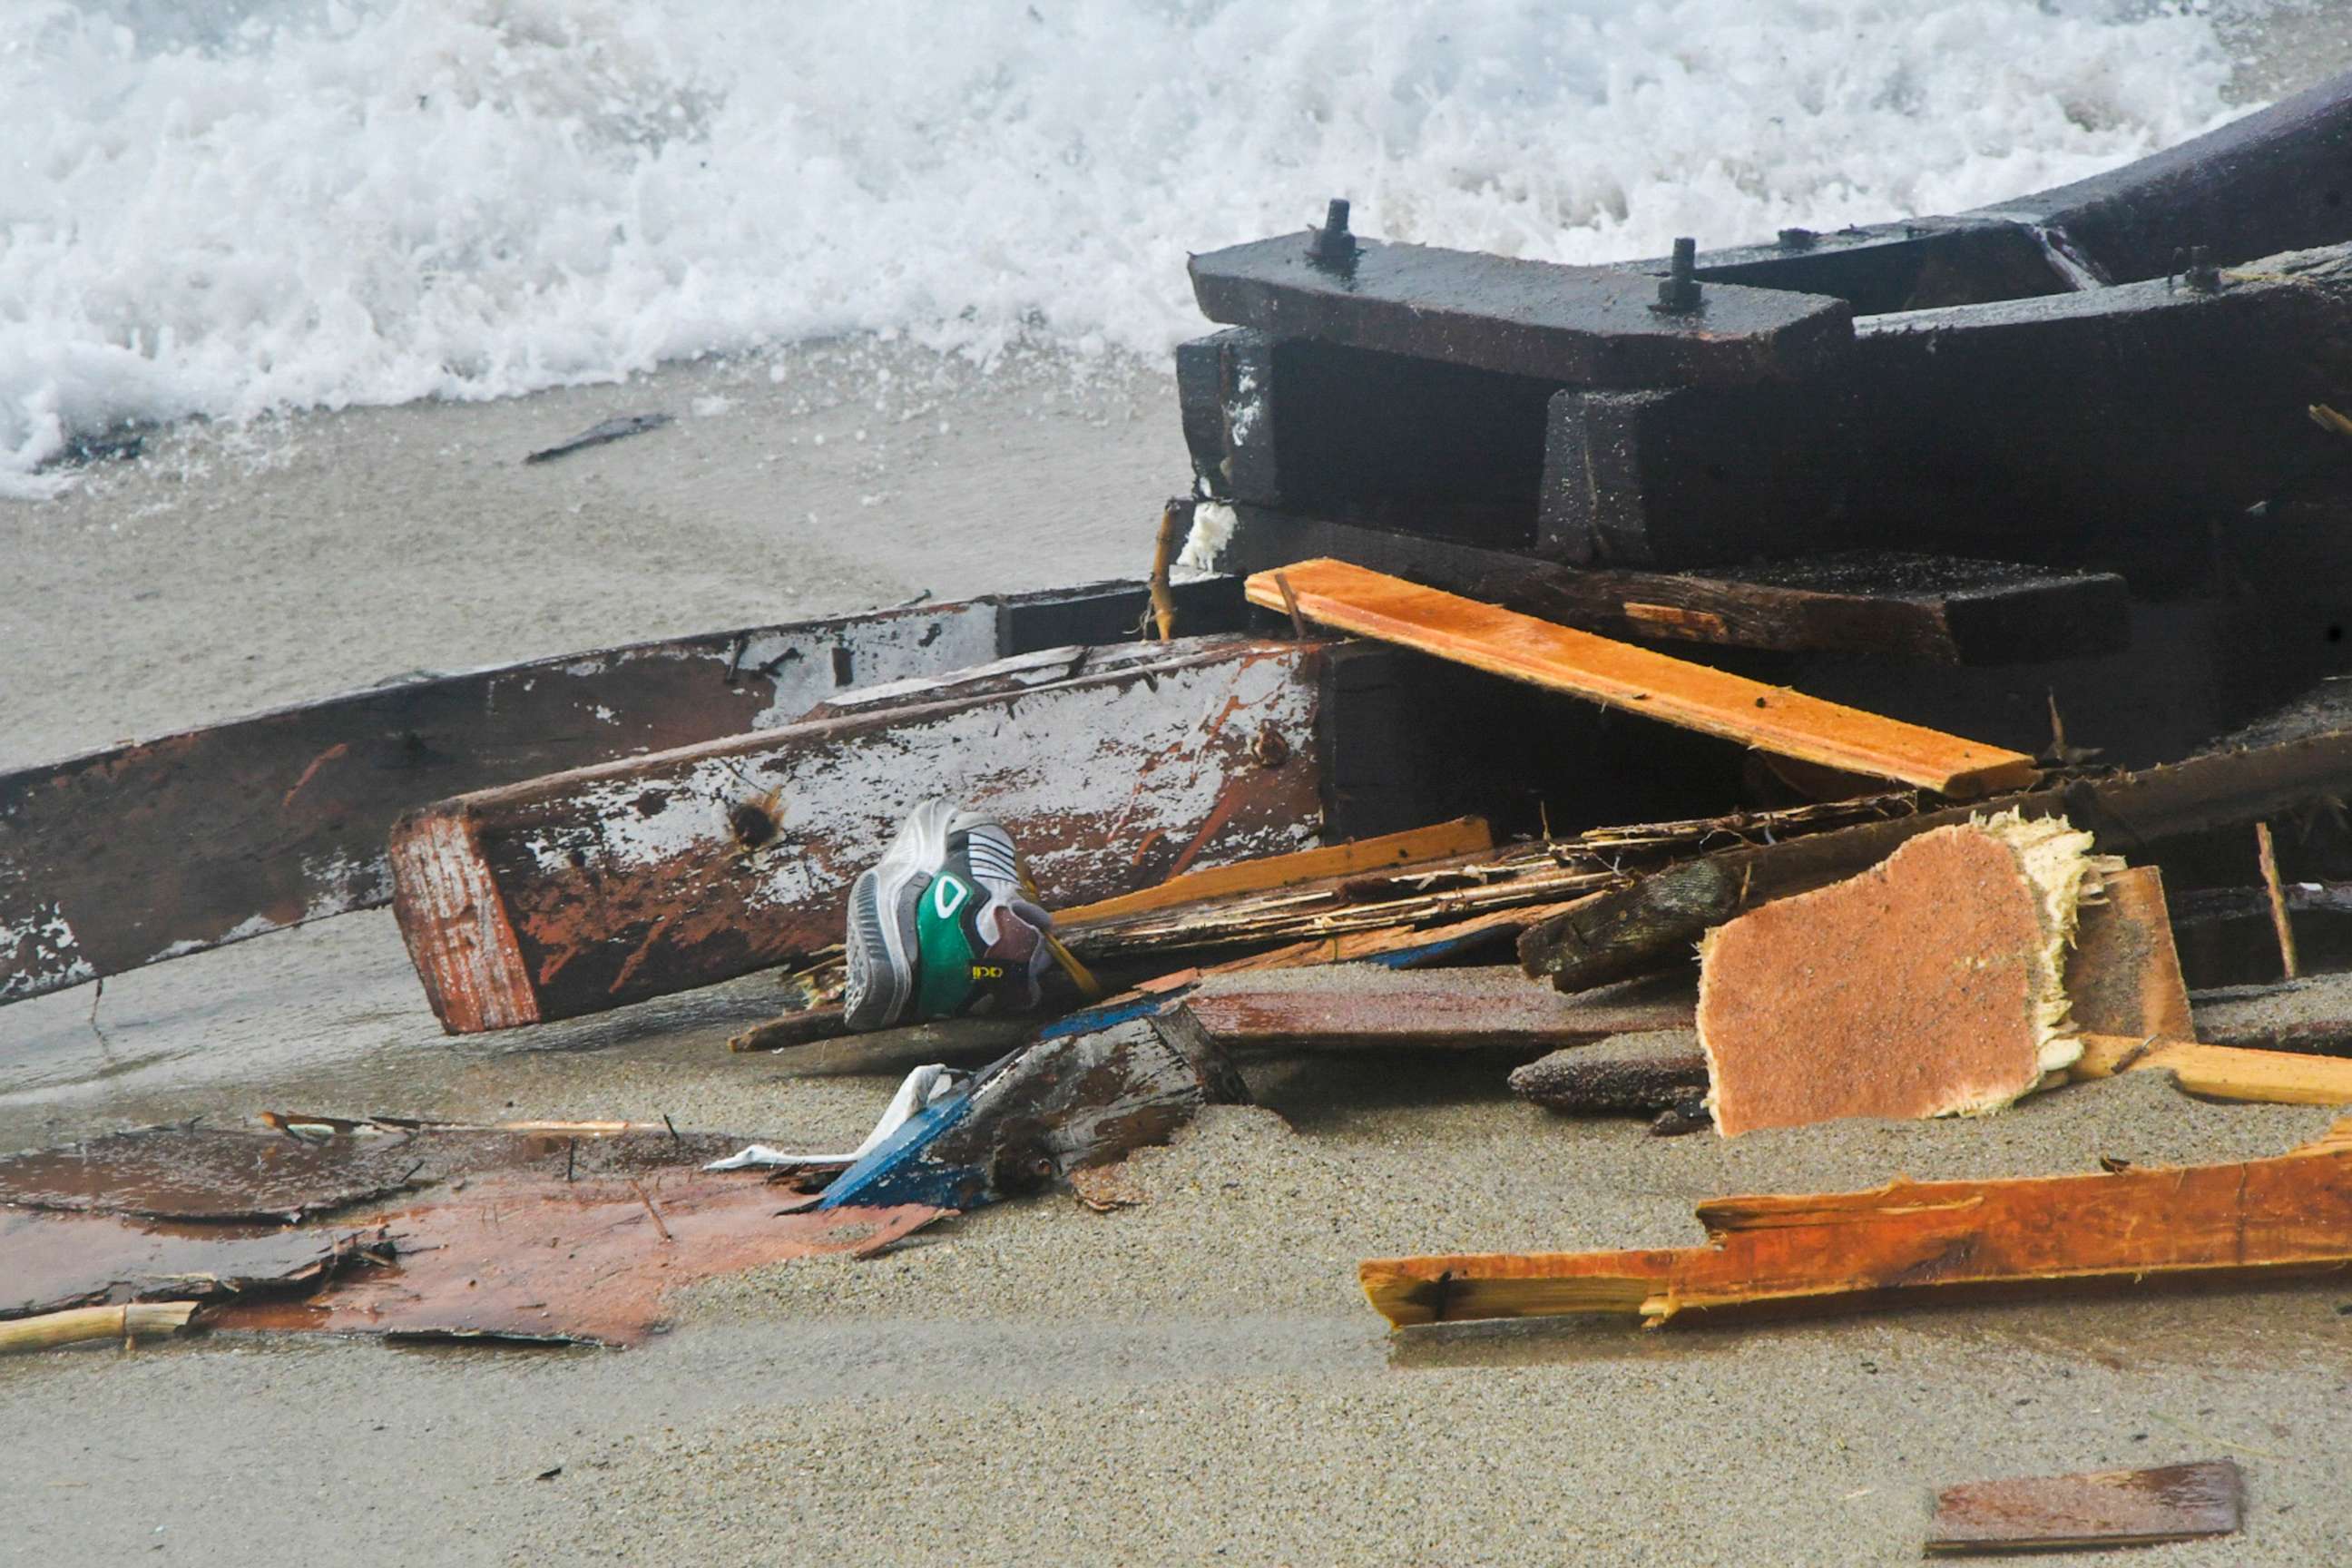 PHOTO: The wreckage from a capsized boat washes ashore at a beach near Cutro, southern Italy, Feb. 26, 2023.